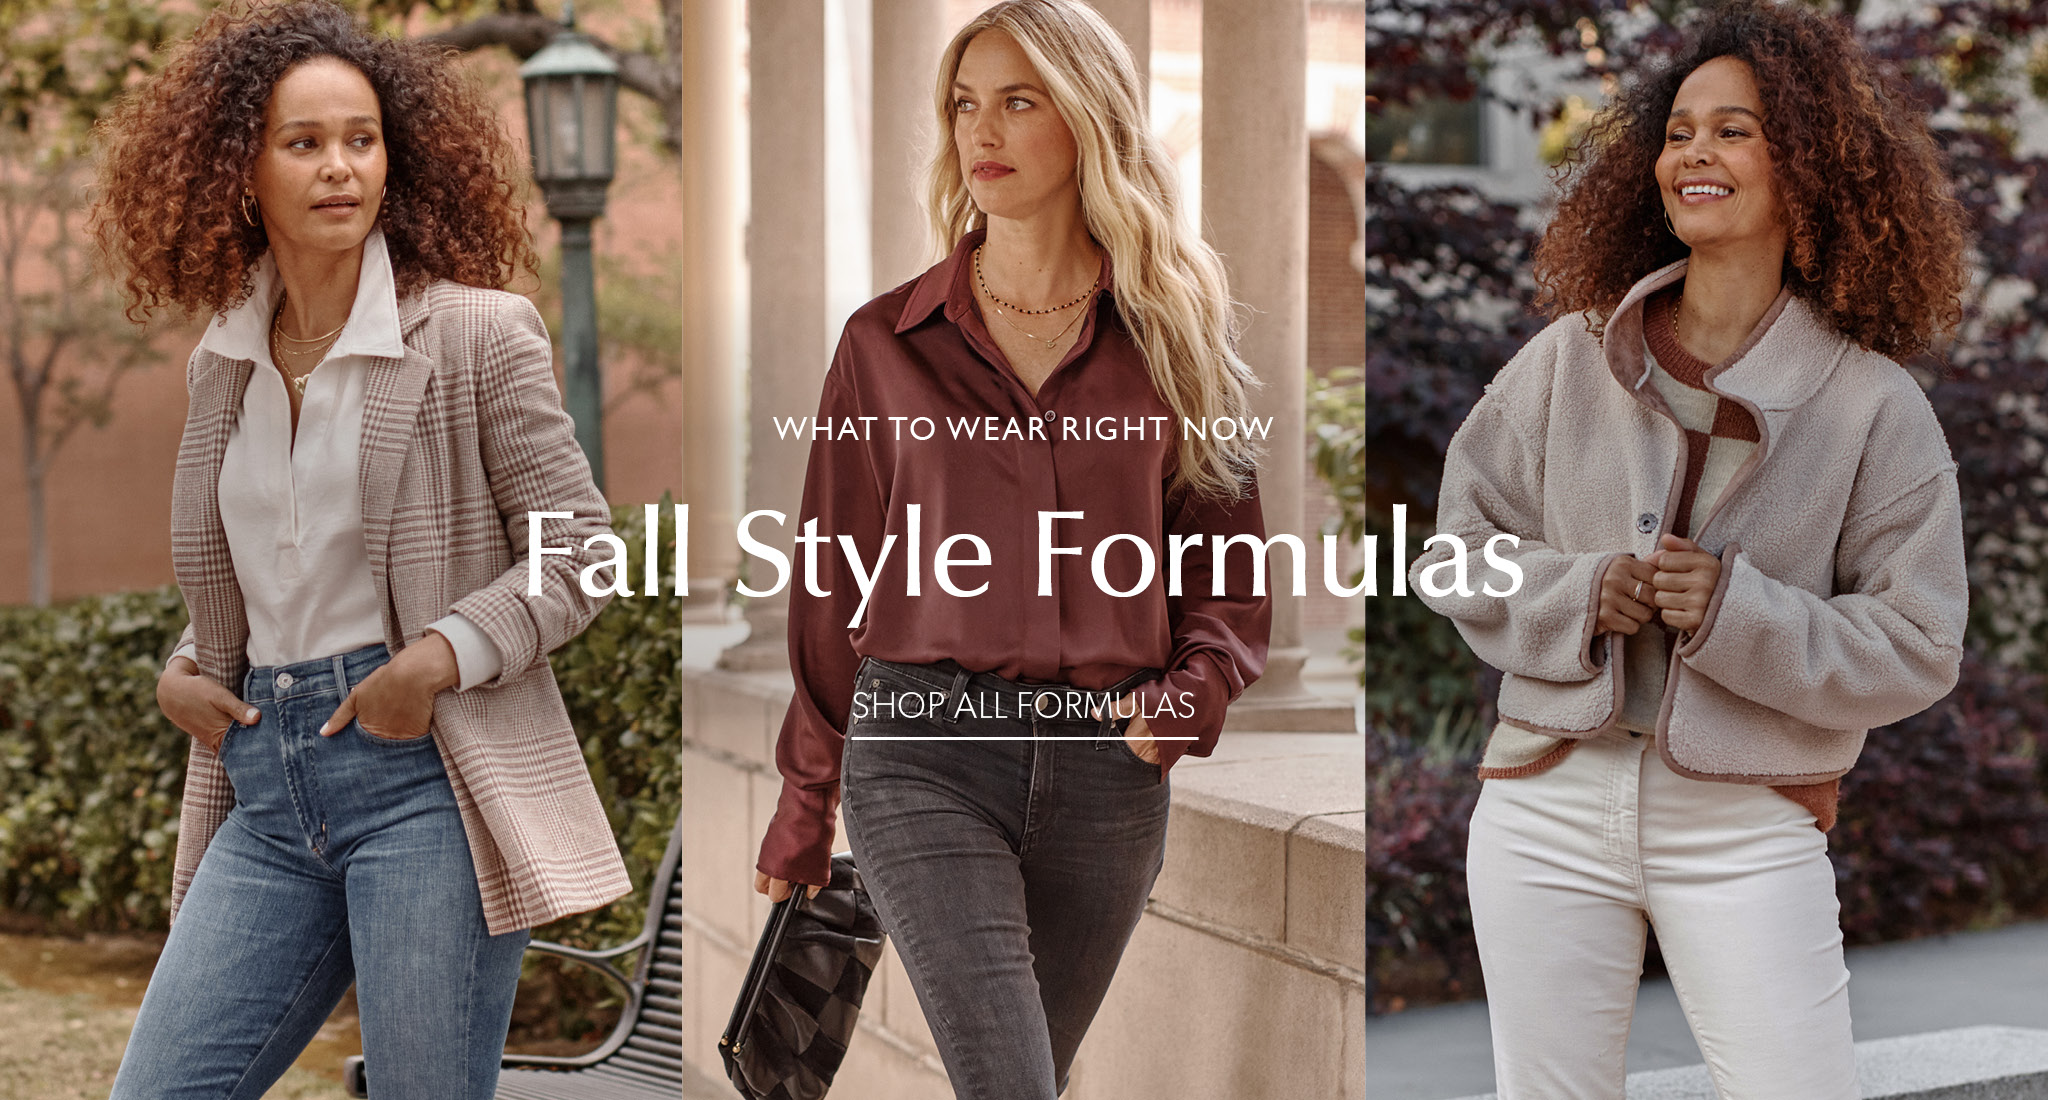 Woman in a blazer and jeans, woman in a burgundy shirt and jeans, woman in a fleece jacket and white jeans - Shop Now